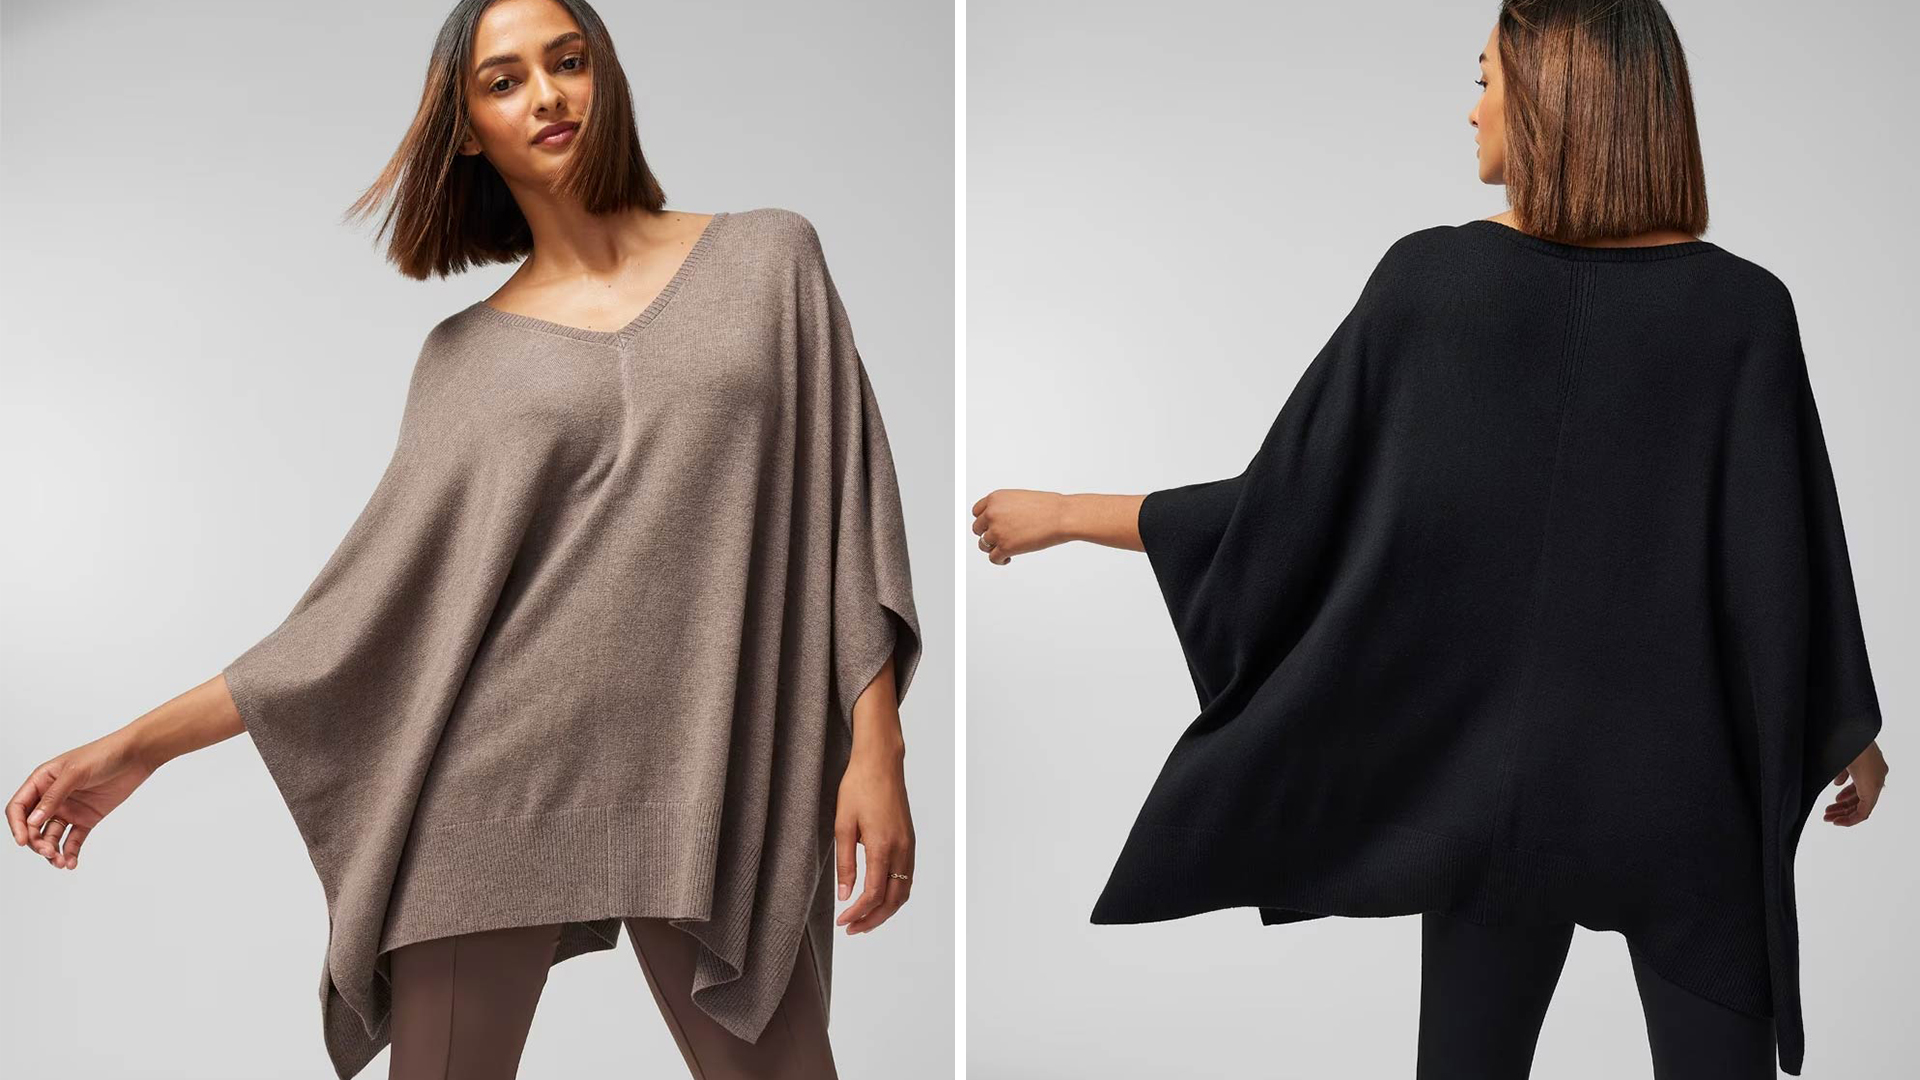 (Left) Soma<sup class=st-superscript>®</sup> women’s model wearing a brown sweater poncho and brown pants. (Right) Soma<sup class=st-superscript>®</sup> womens’ model showing the back of a black sweater poncho and black pants.